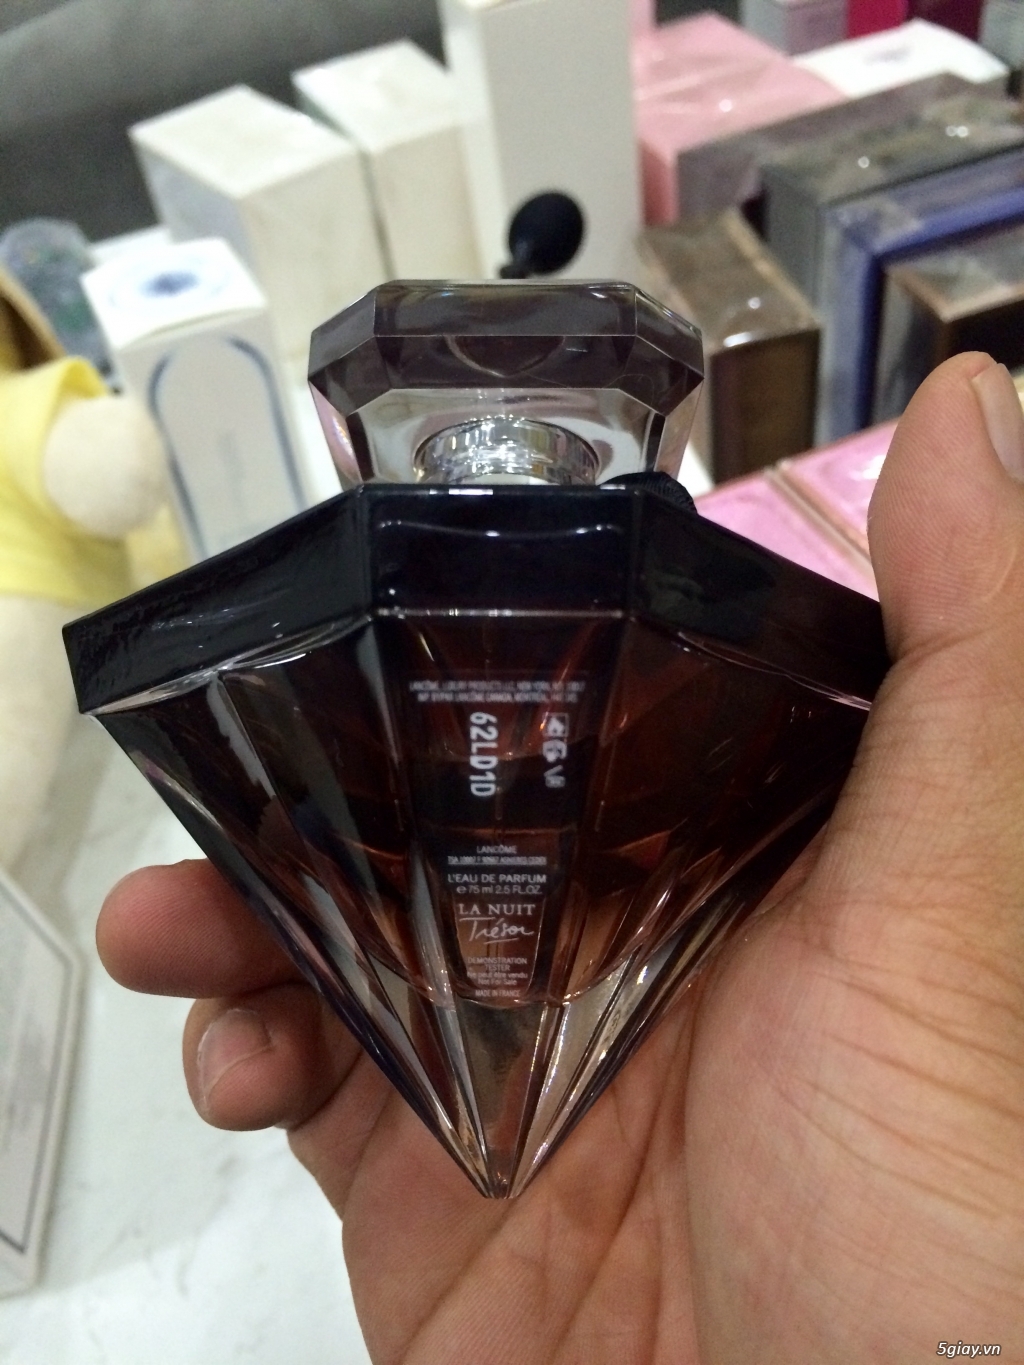 Nô s scent: ONLY FOR TESTER NOT FOR SALE - 1